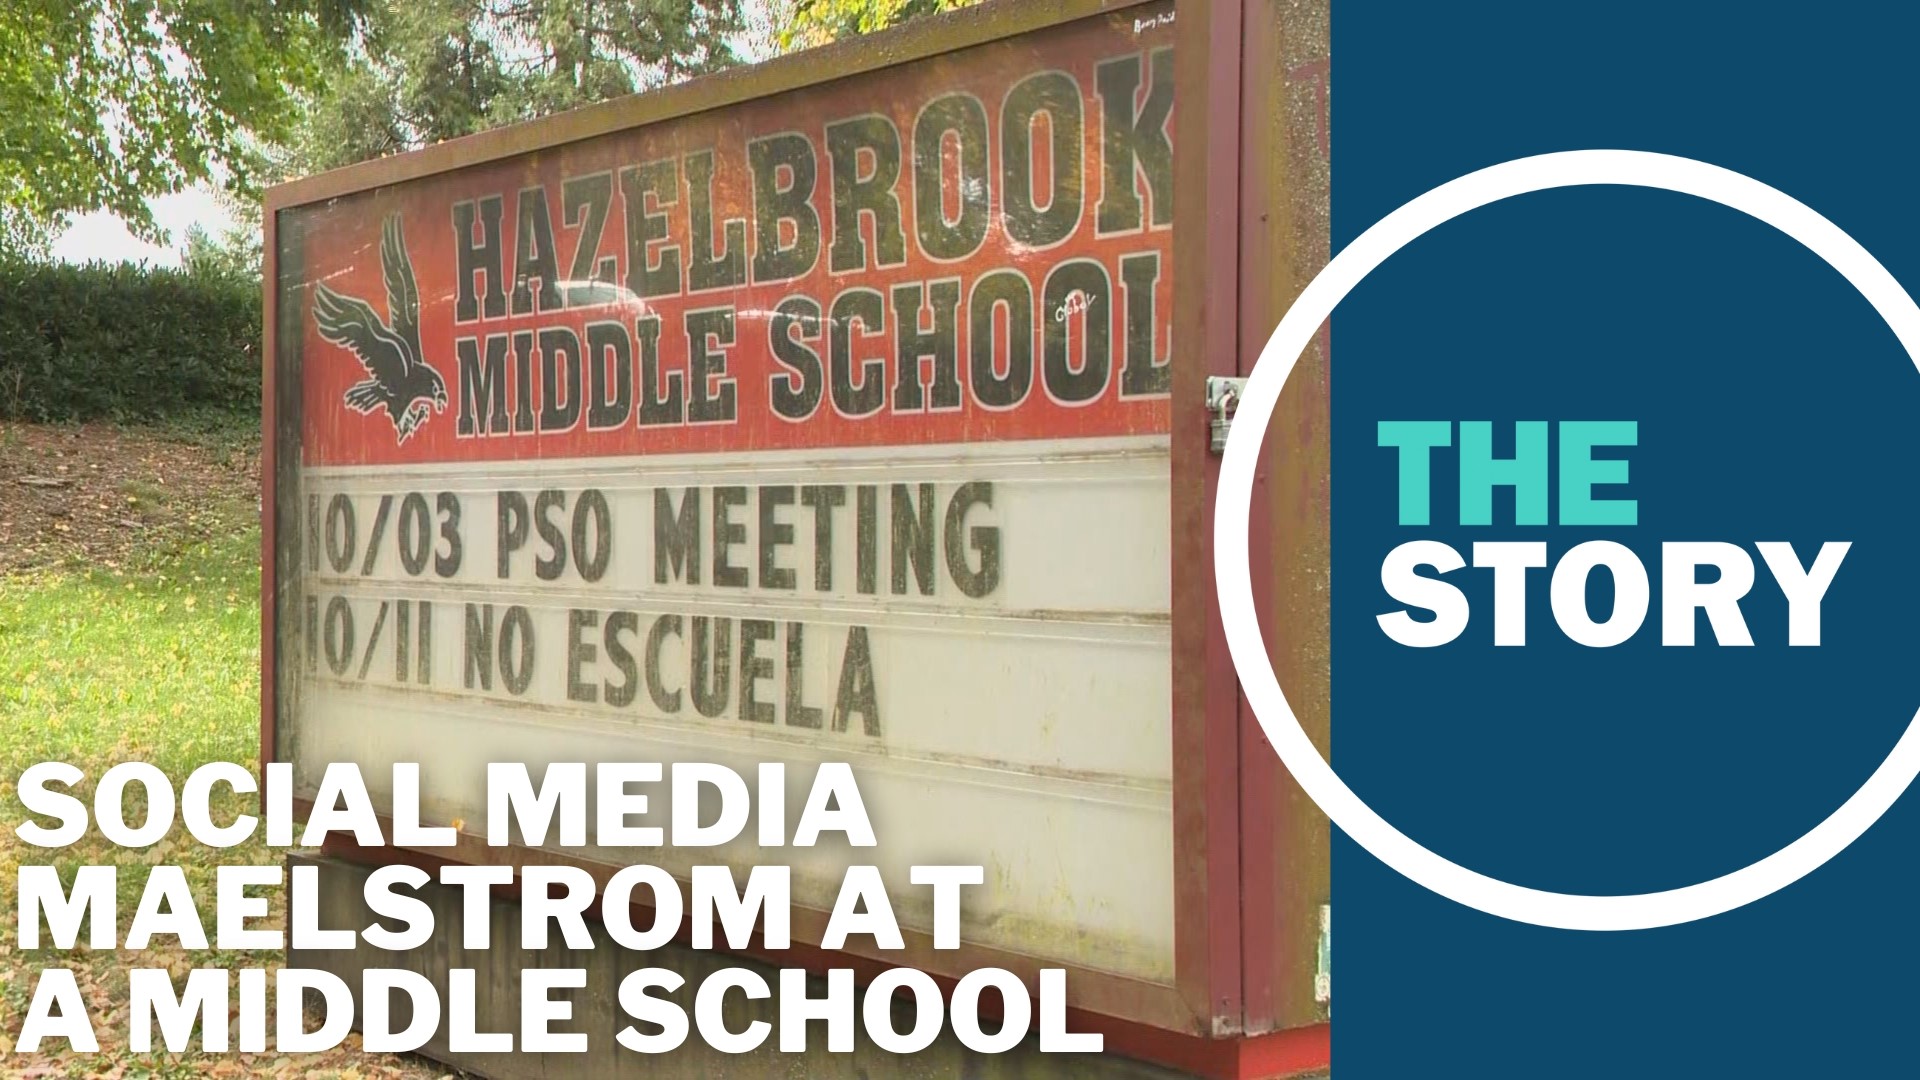 Since videos of student violence at Hazelbrook Middle School went viral last week, the school has dealt with threats and the spotlight of anti-transgender activists.